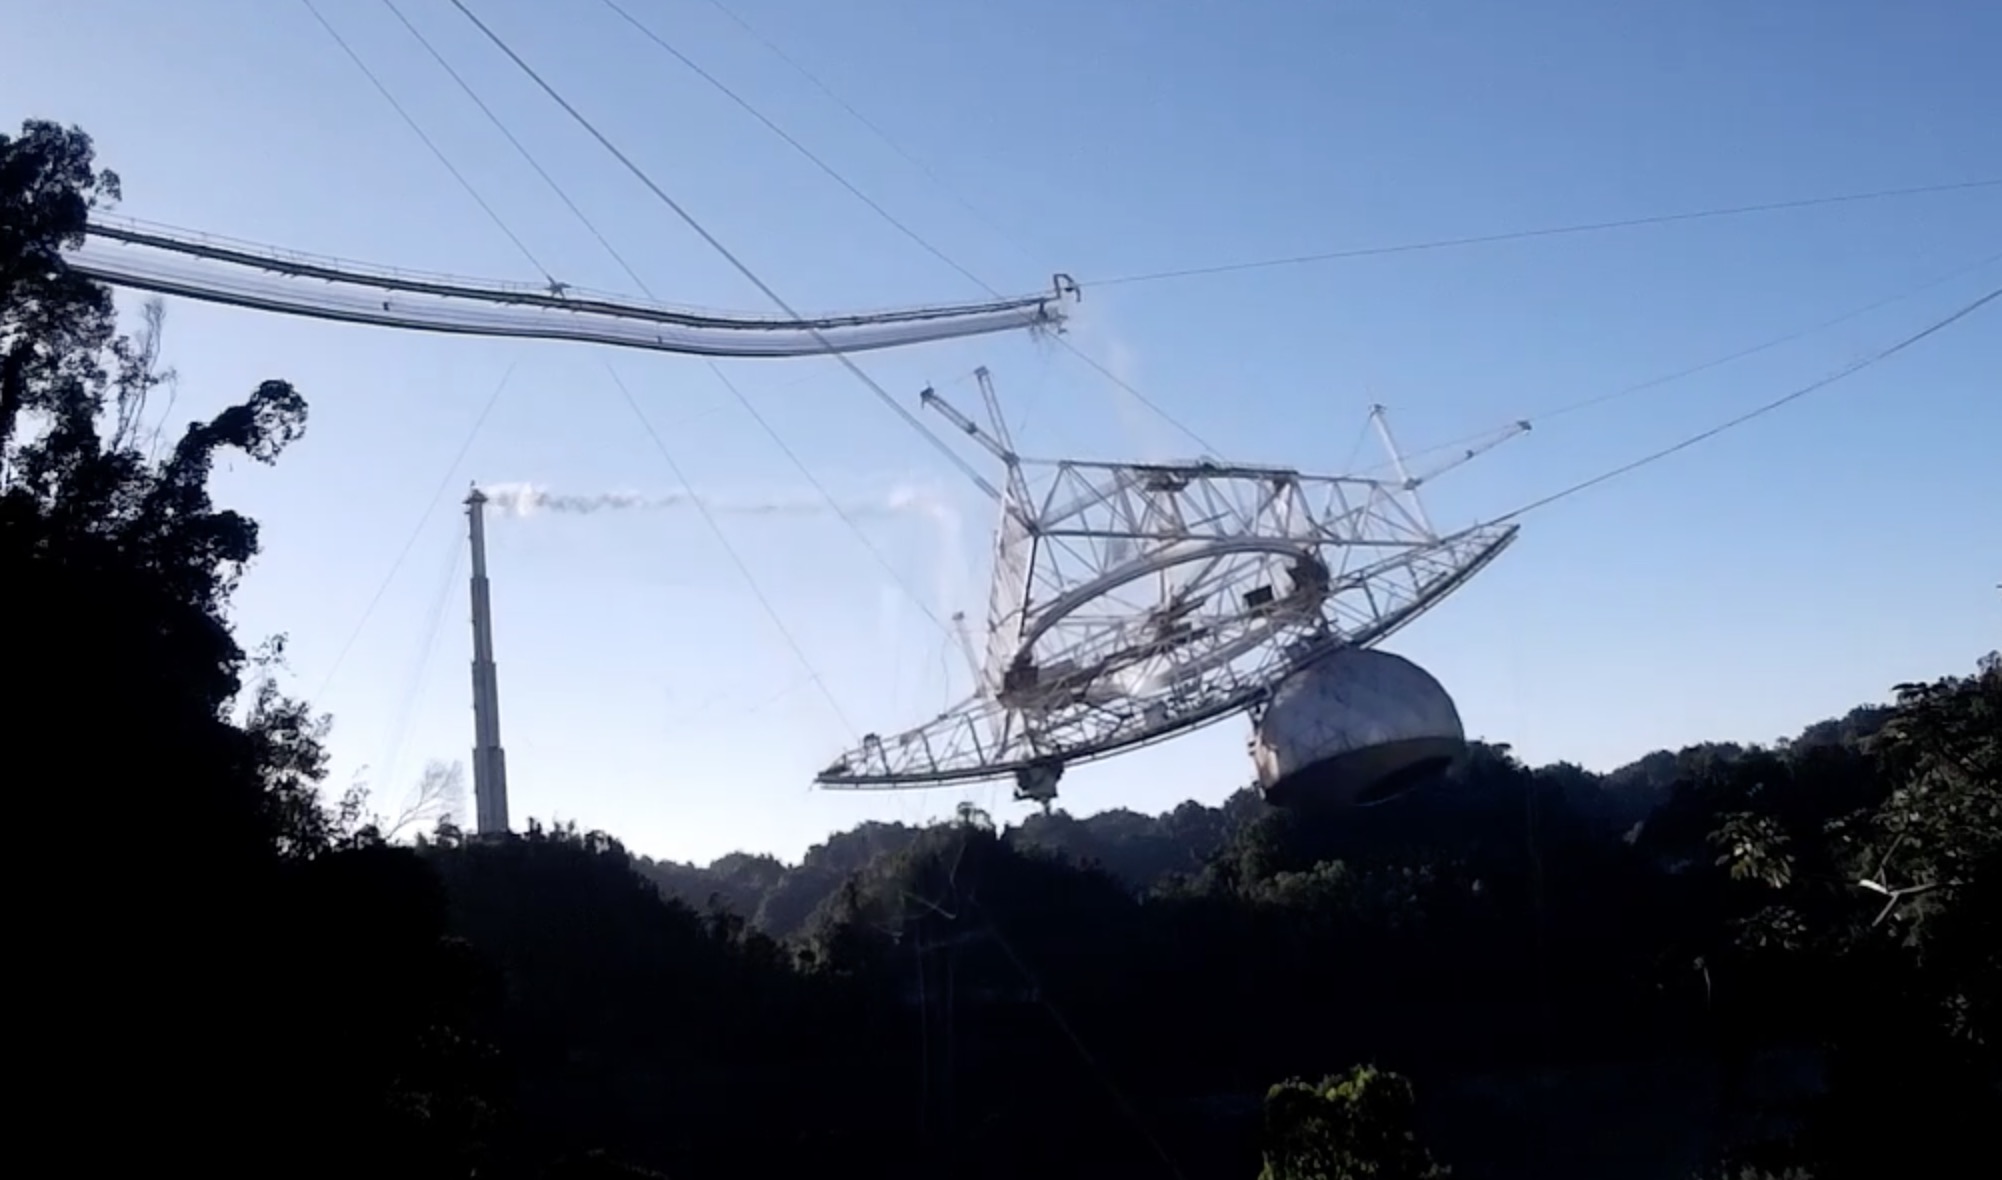 On-the-ground footage shows a cable snapping, sending the platform crashing to the ground.